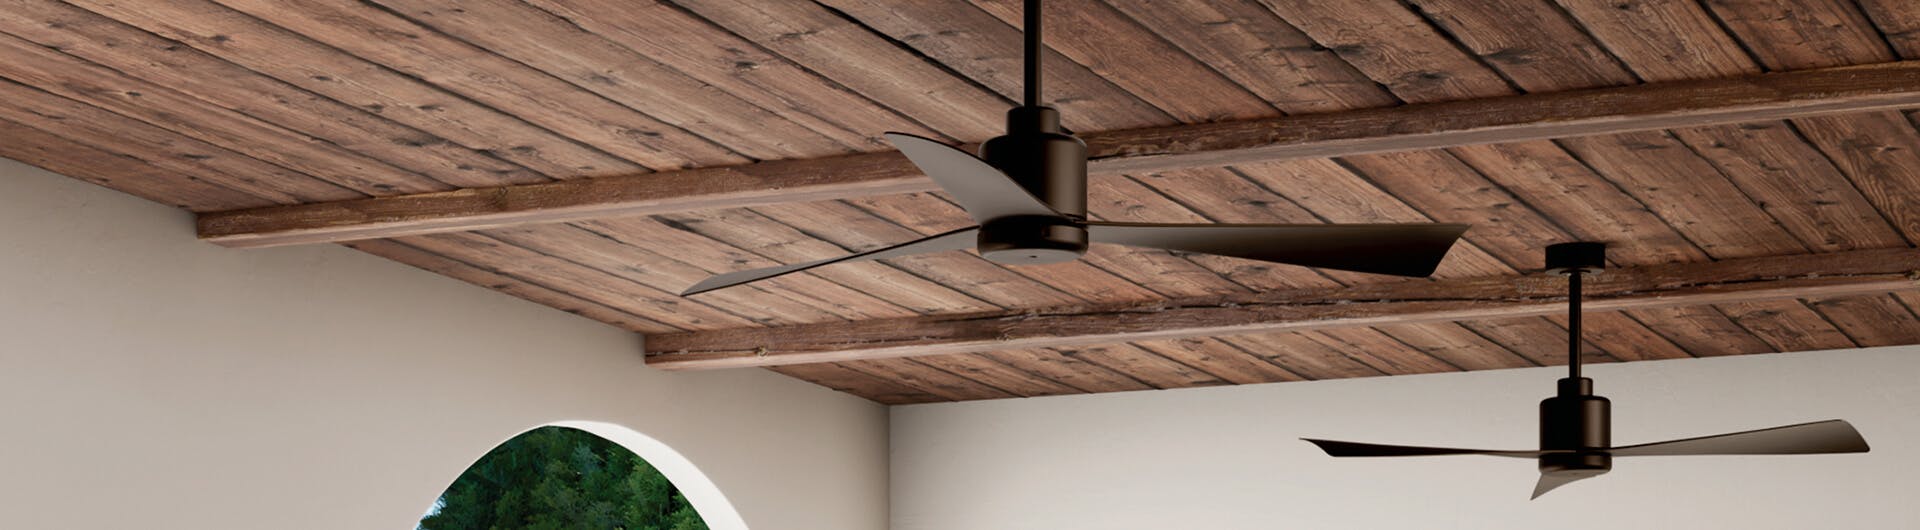 Two True ceiling fans in satin natural bronze mounted to a wooden ceiling